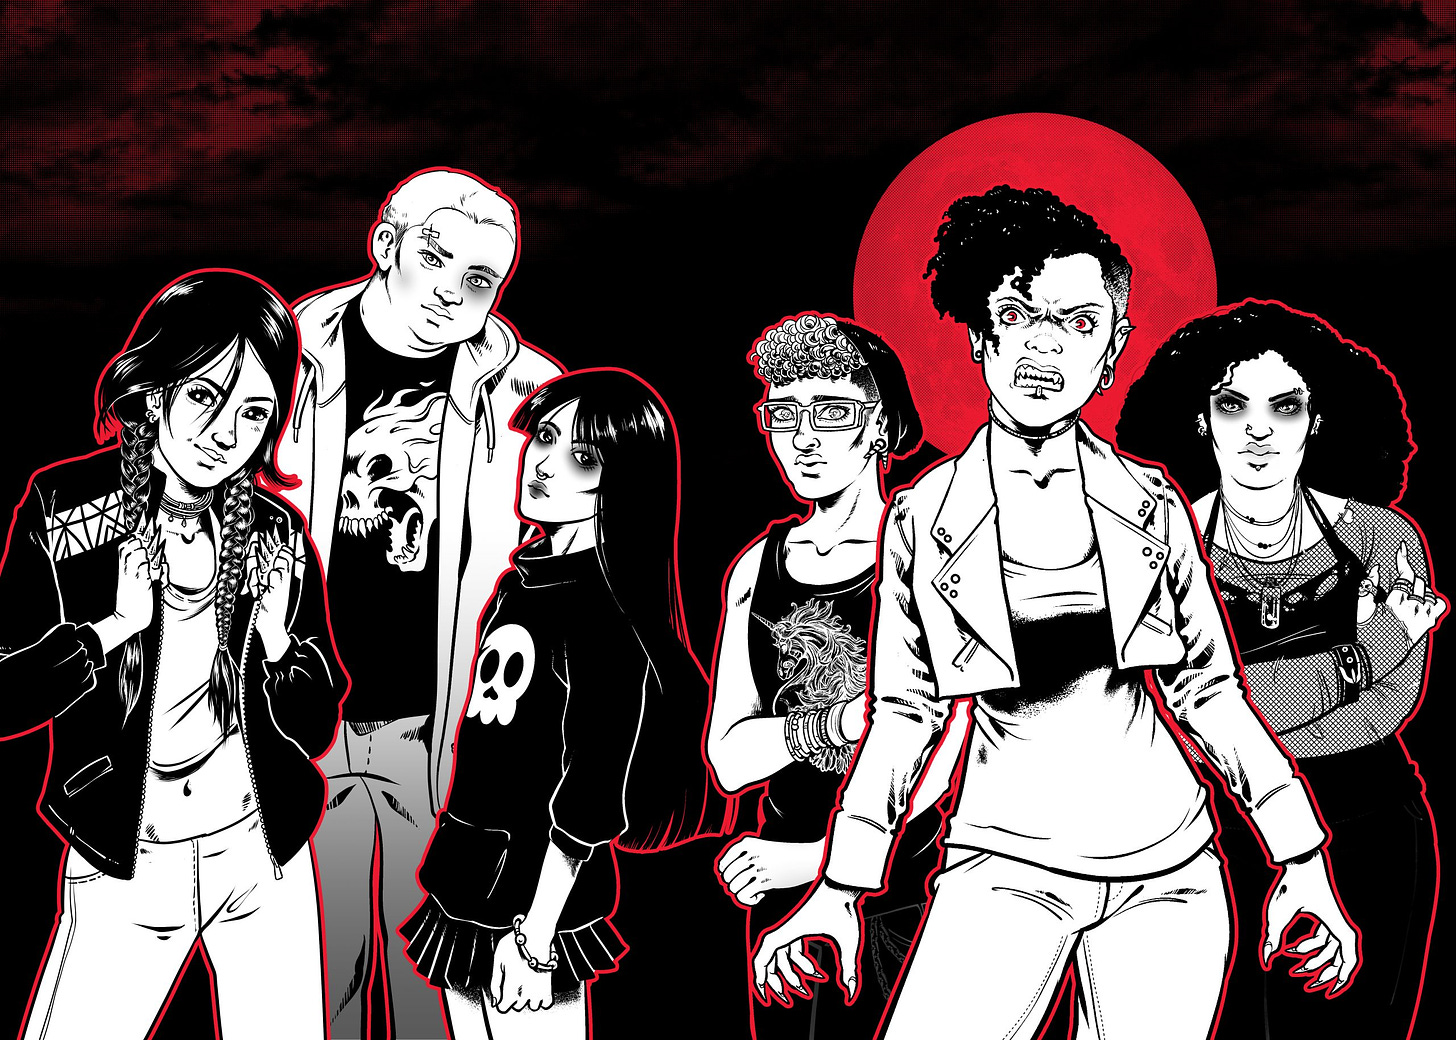 Cover art of Monster Hearts 2e without the title text. It shows a black and white illustration of several teens outlined in red. They have cool leather jackets, some have claws, other dark circles under their eyes, all look dramatic.